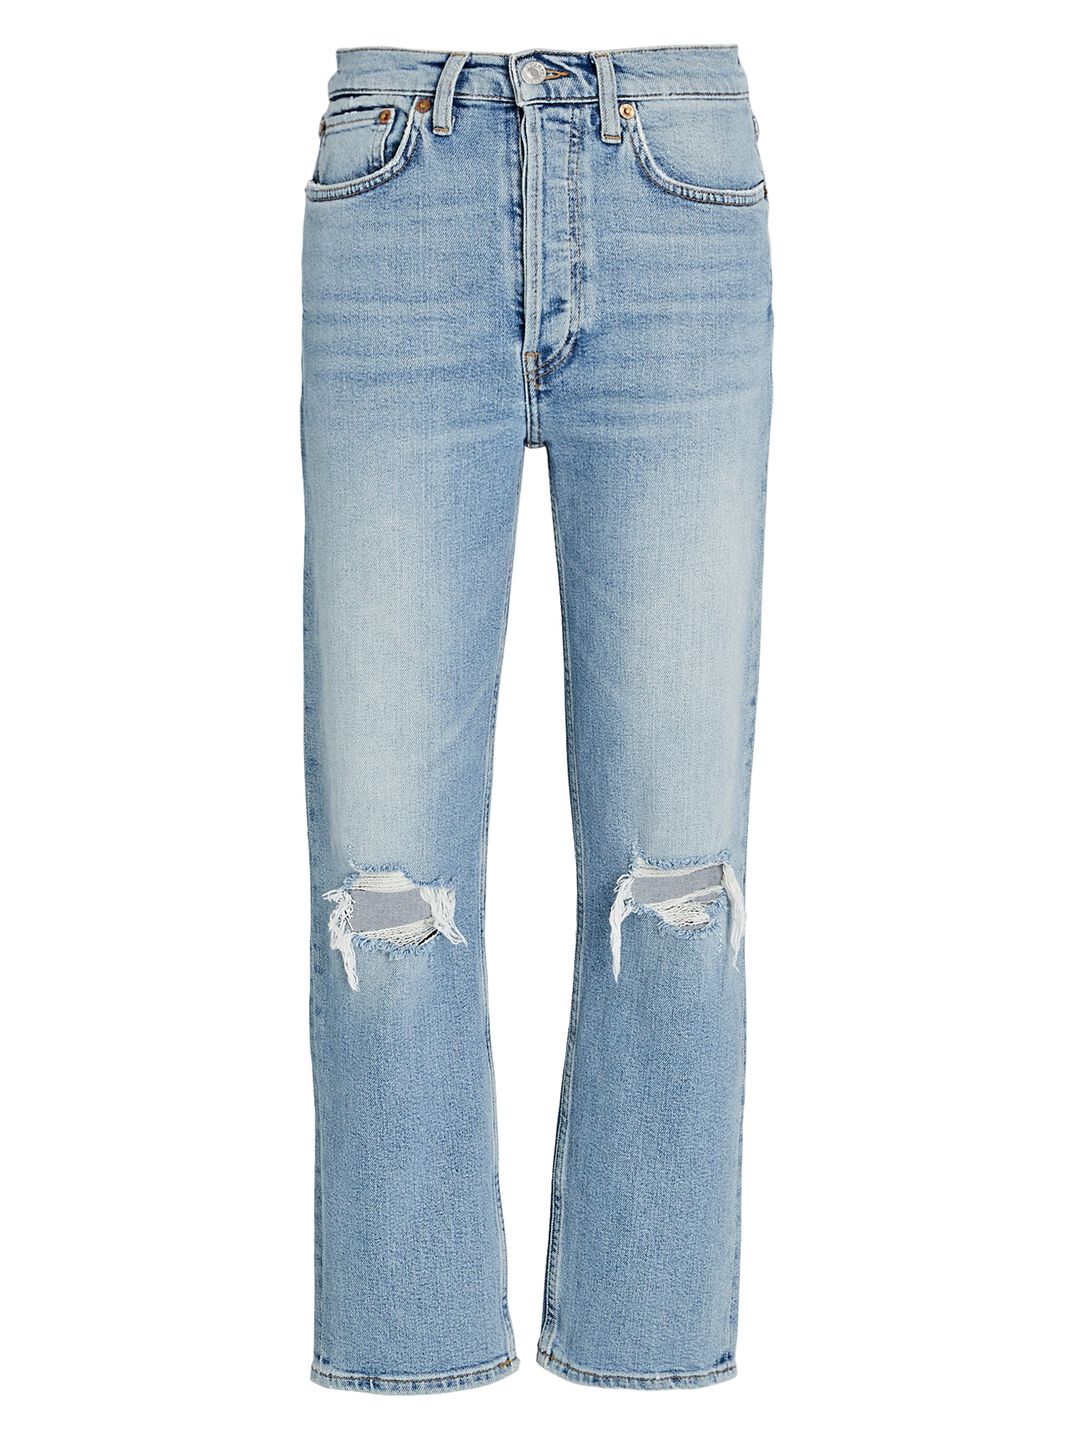 70s High-Rise Stove Pipe Jeans